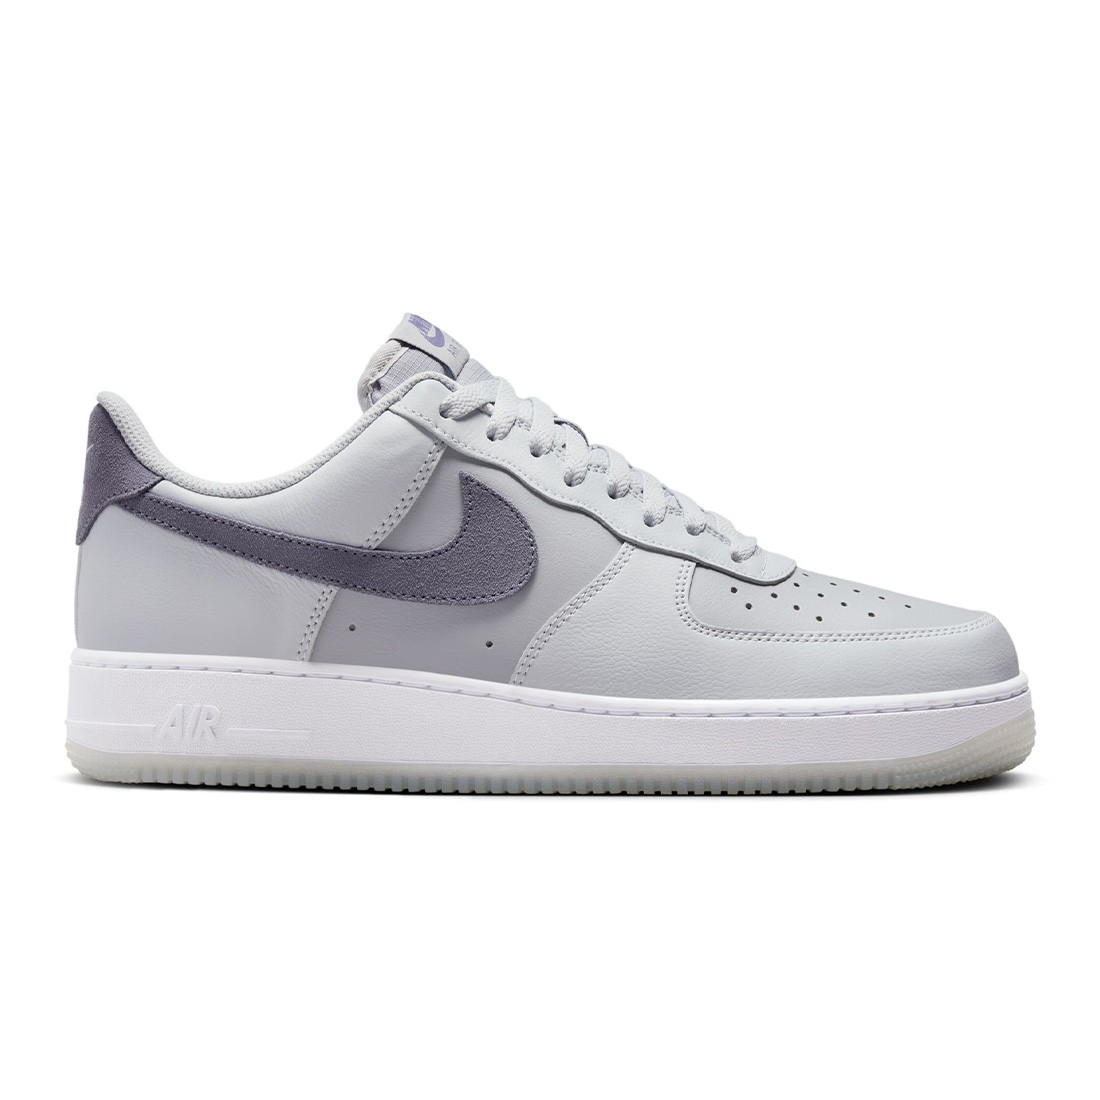 Nike released Men Air Force 1 '07 Lv8 (pure platinum / light carbon-wolf grey)